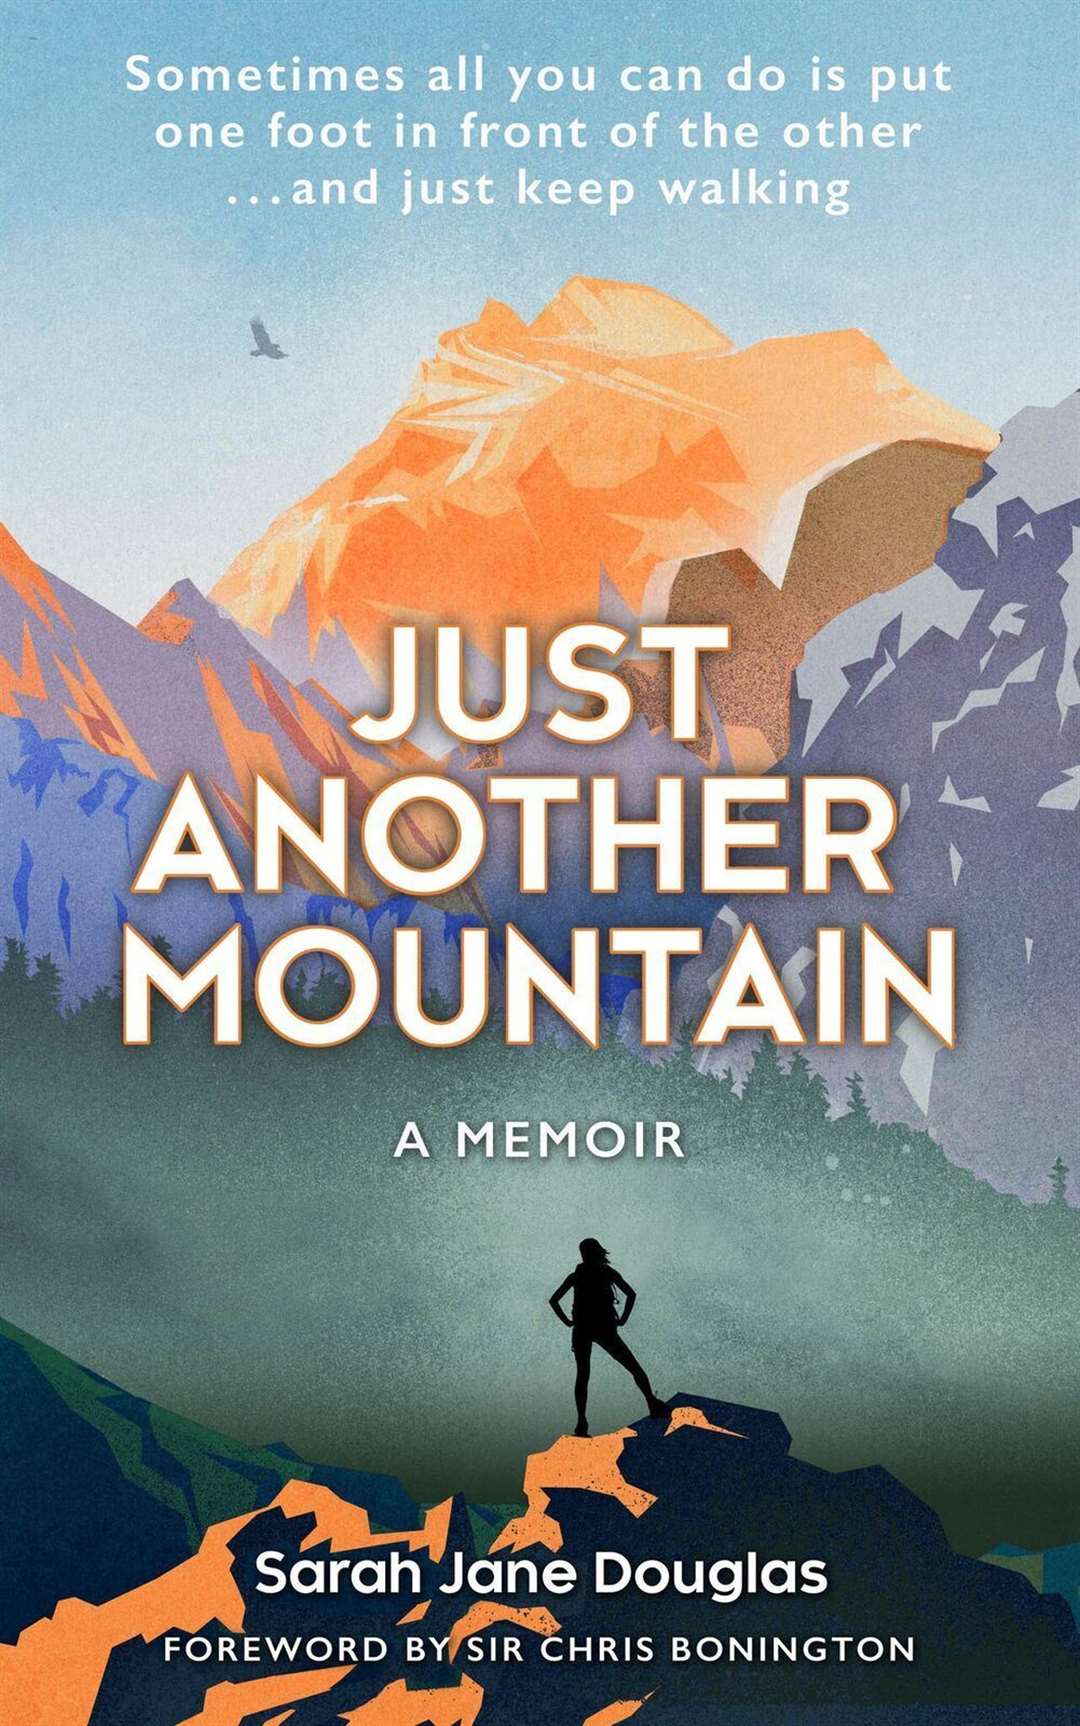 Just Another Mountain by Sarah Jane Douglas.